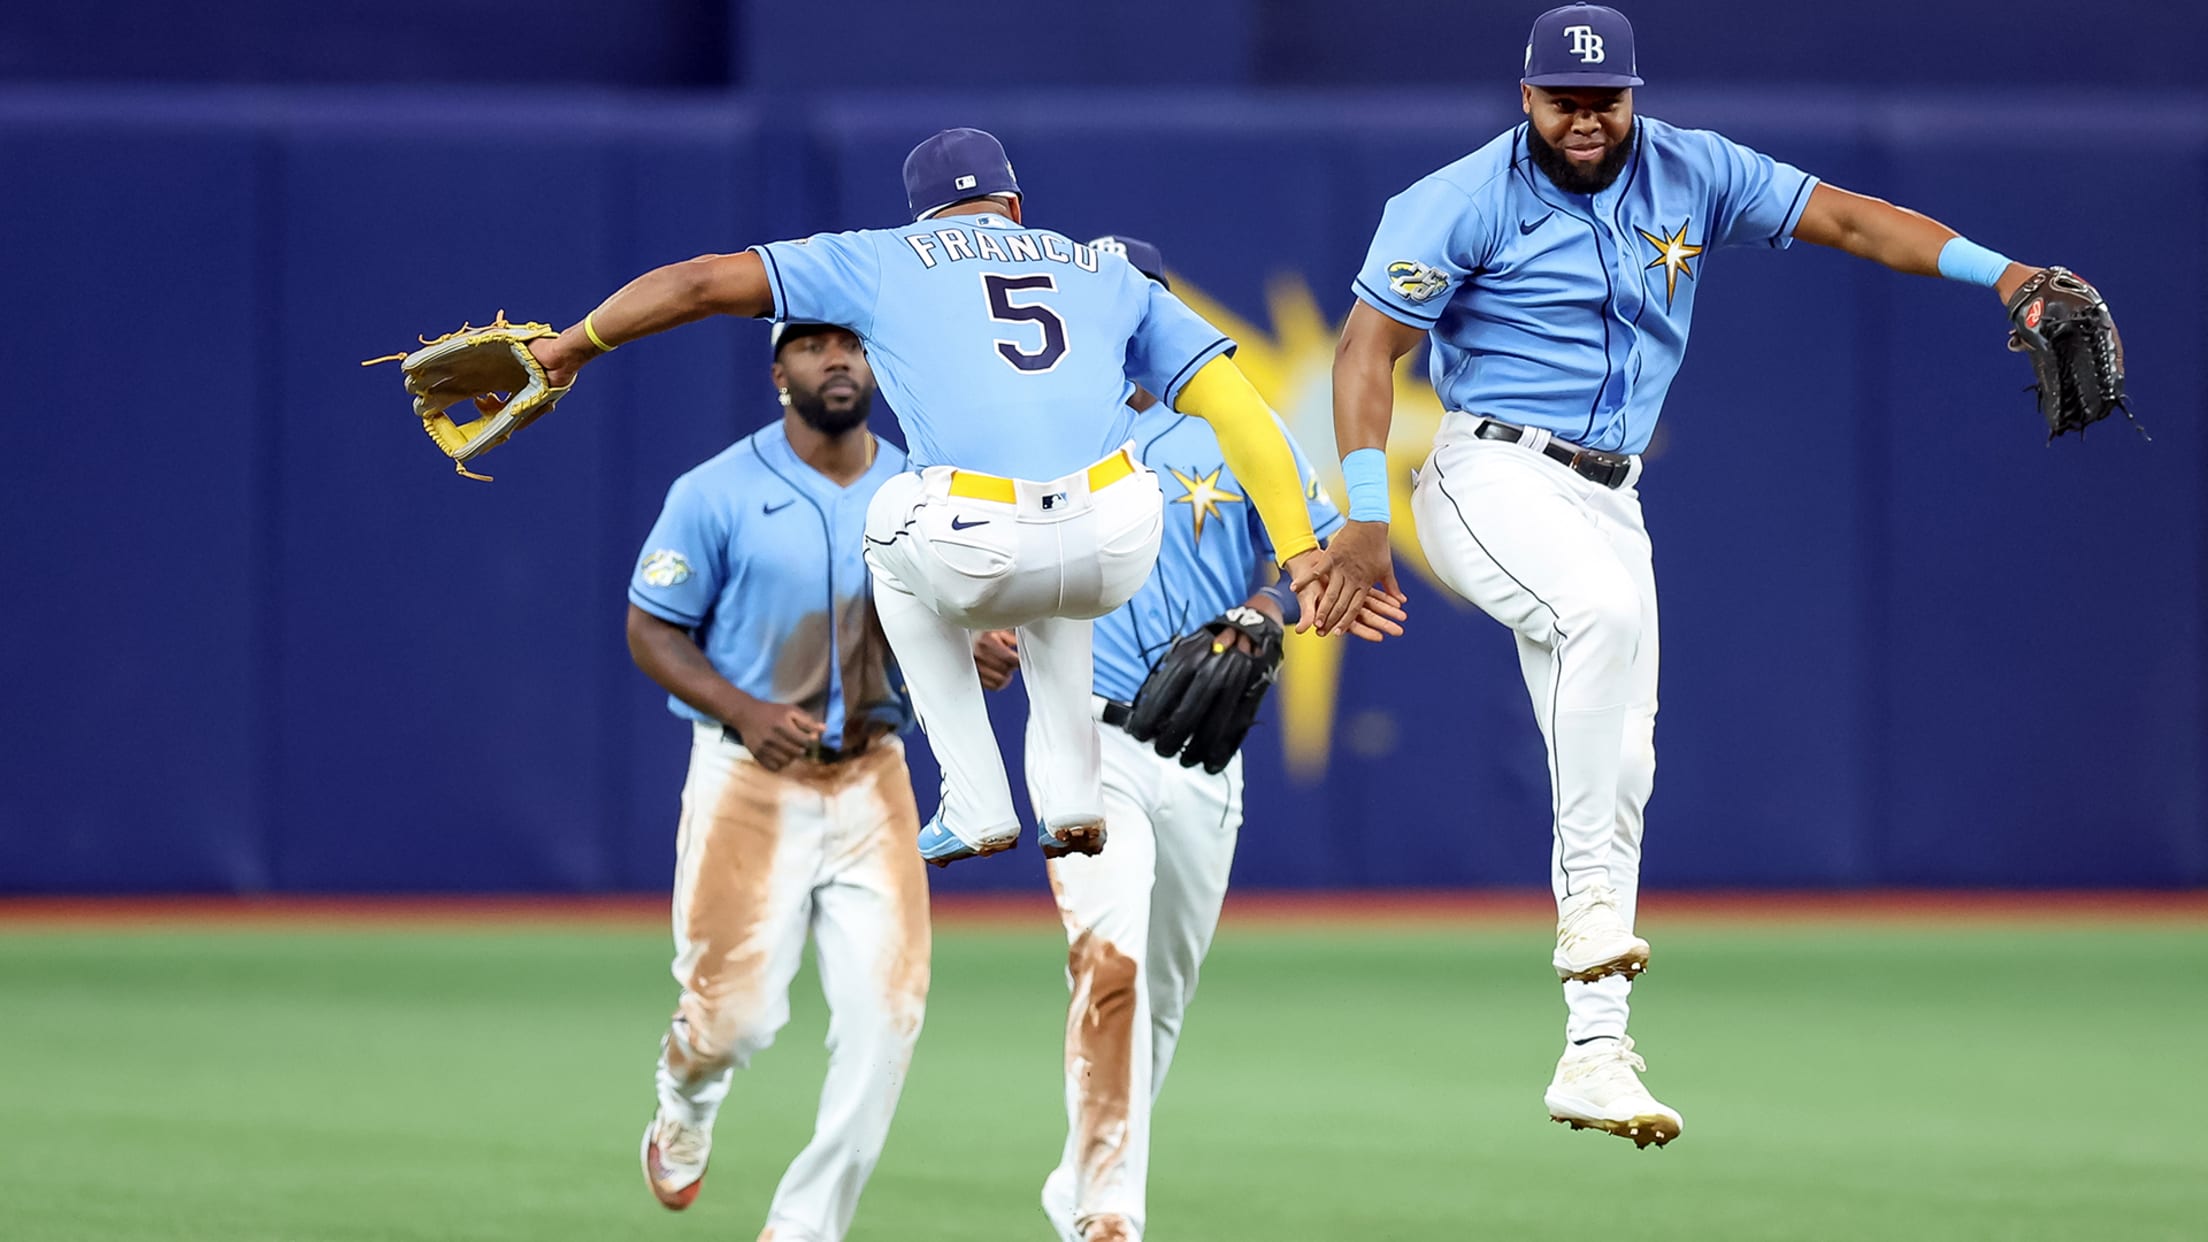 The Rays celebrate another win